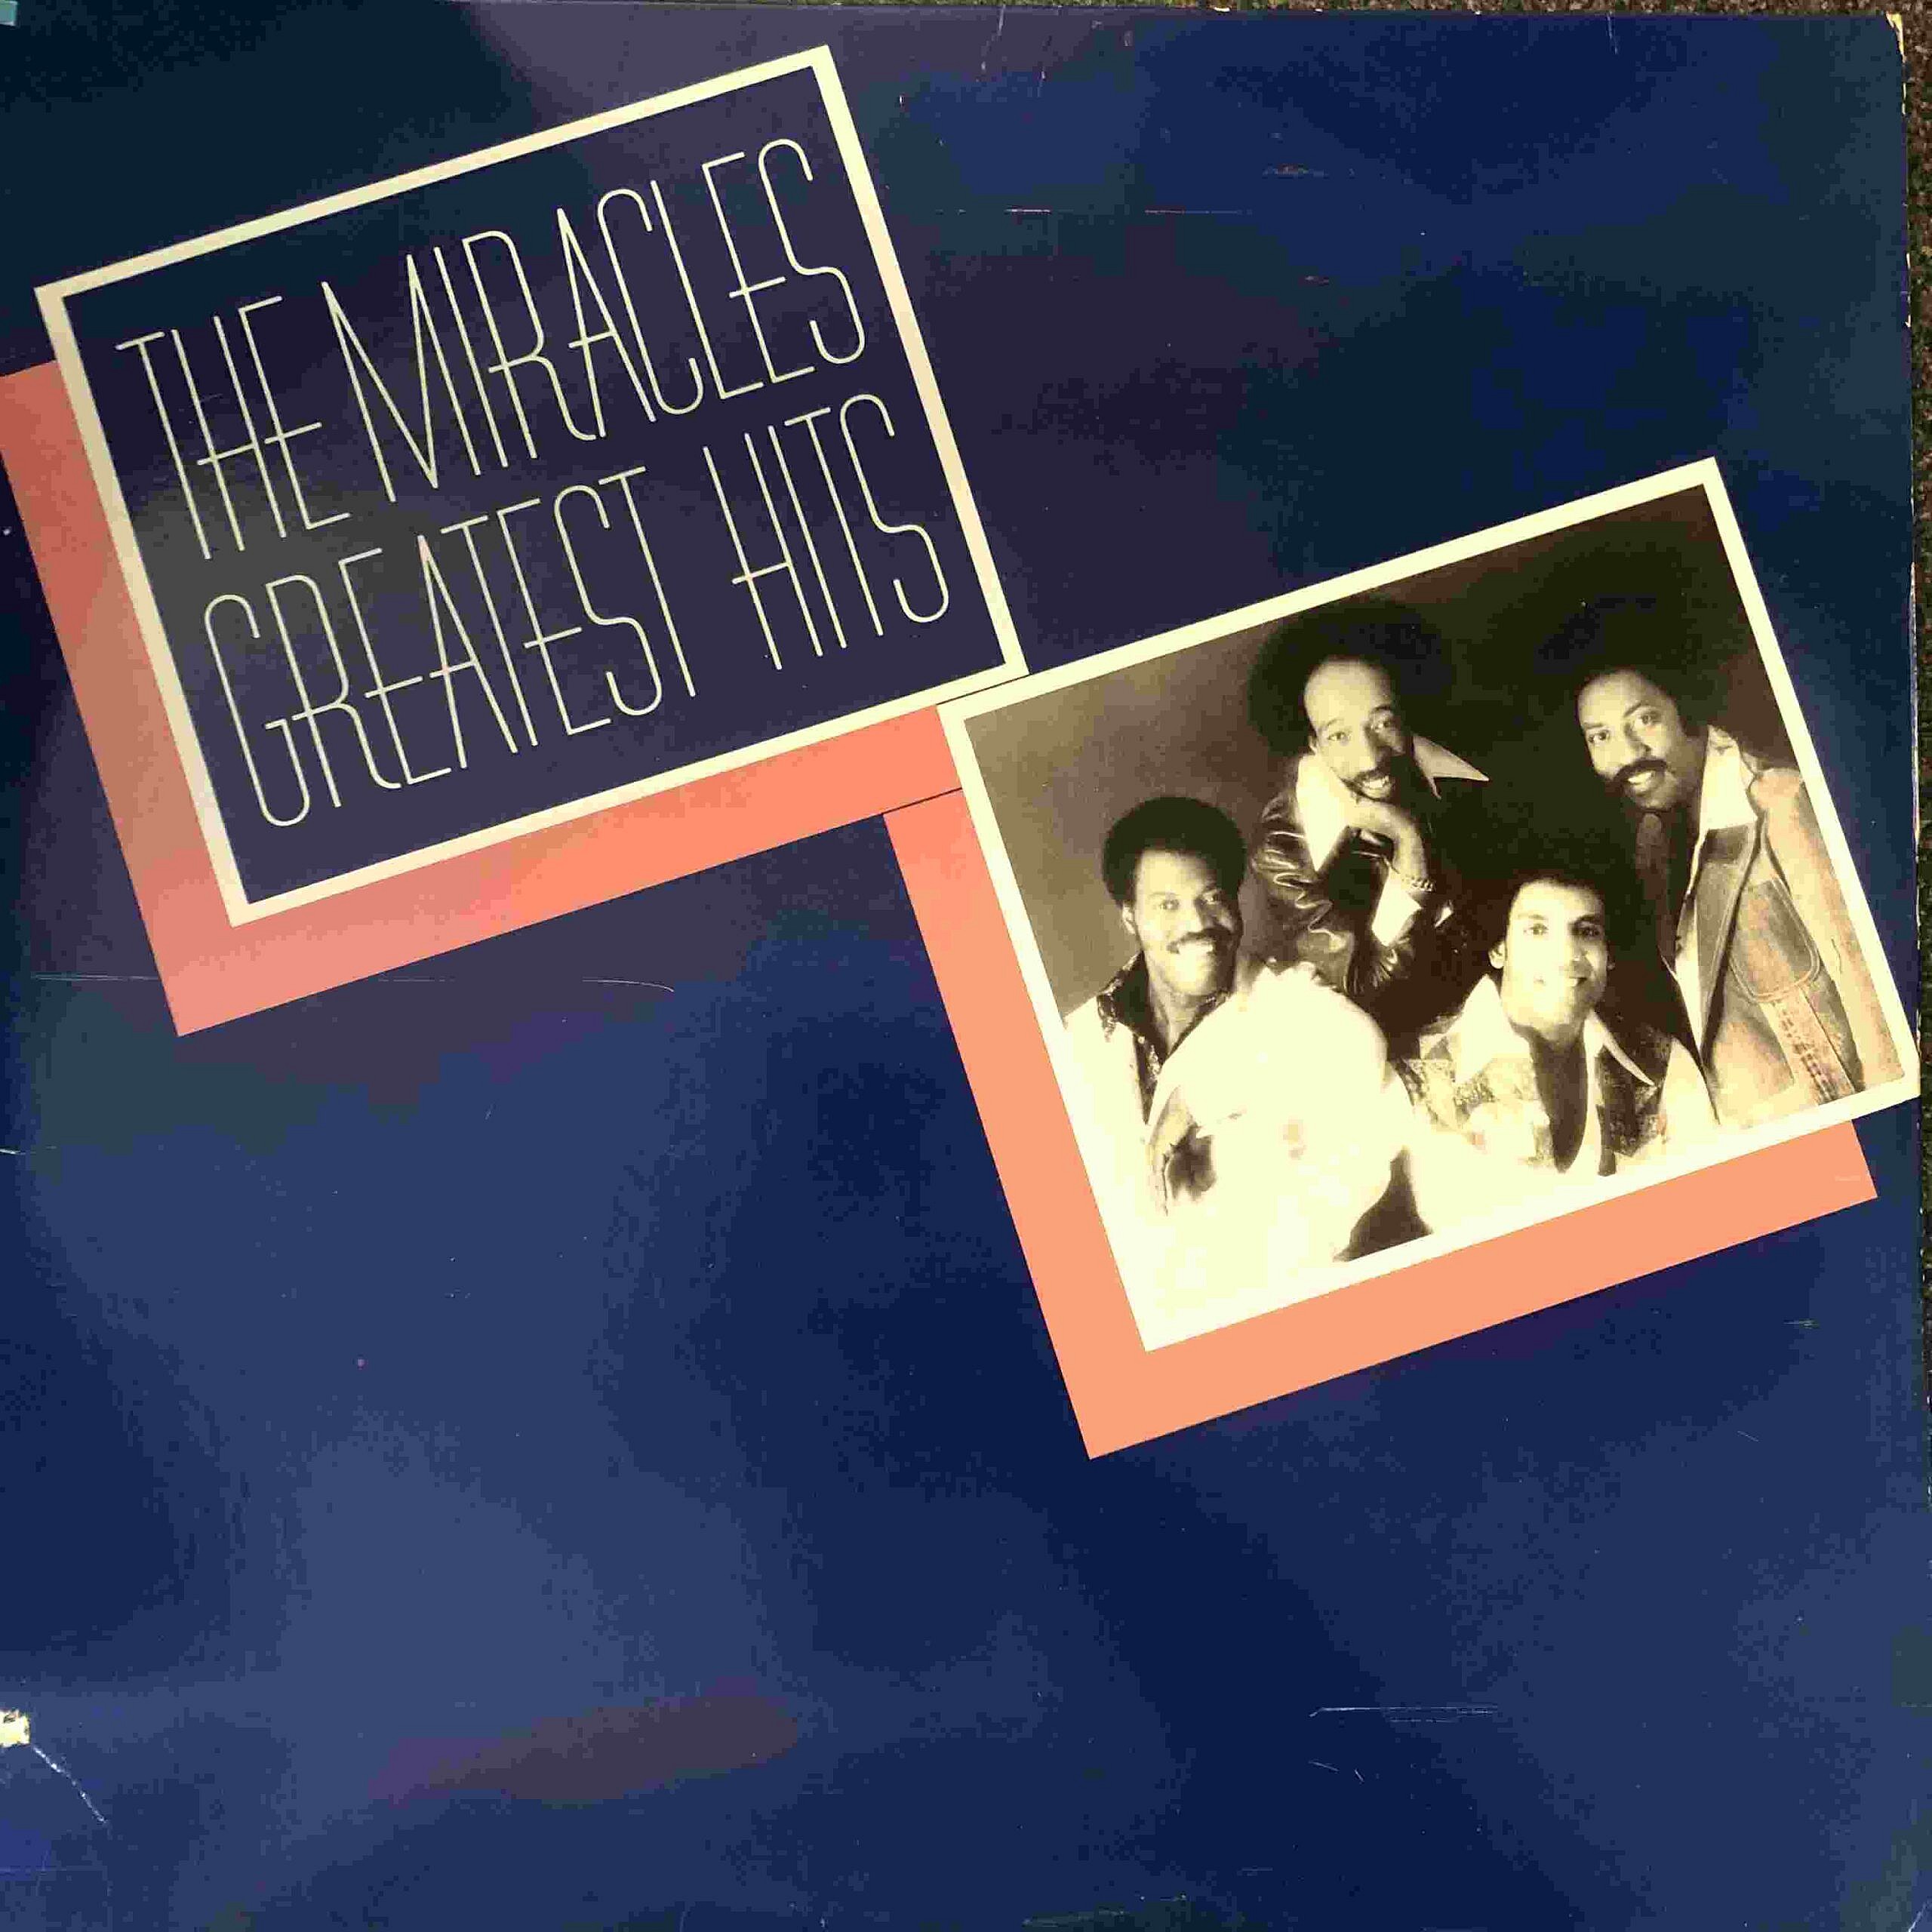 The Miracles Greatest hits